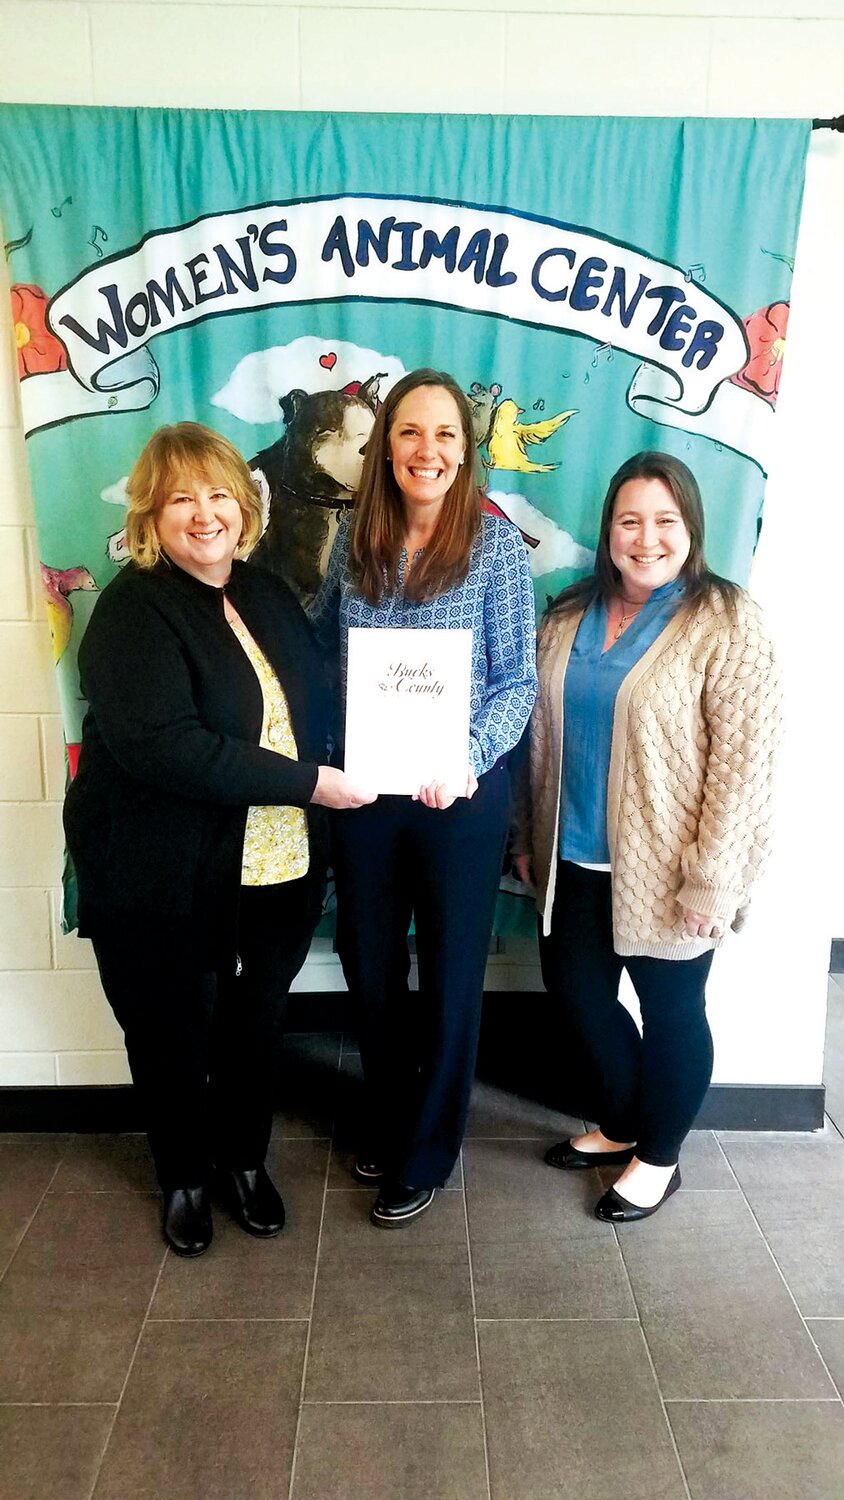 Mandy Mundy, executive director of the Bucks County Foundation, center, presents a grant award to Cathy Malkemes, Women’s Animal Center’s CEO, left, and Katie Ottaggio, director of community programs.